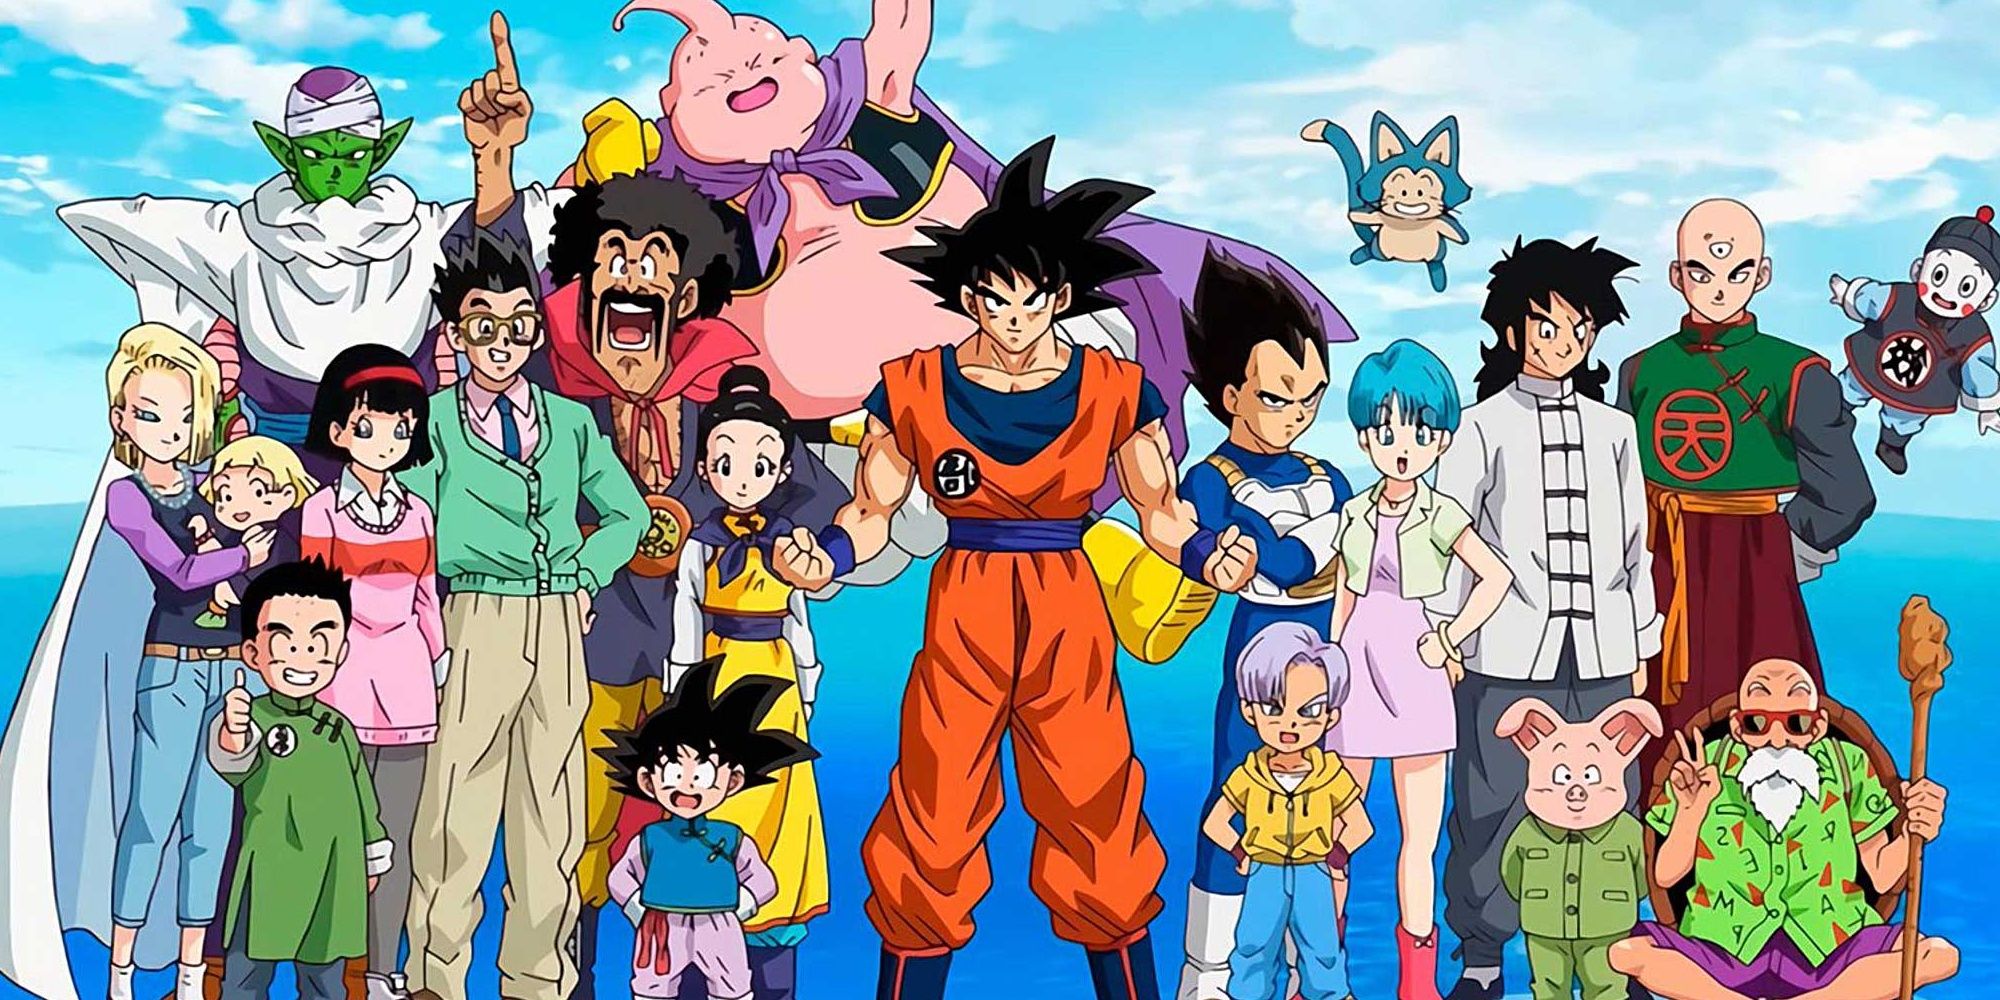 Goku and the Z Fighters pose for a photo in Dragon Ball Super